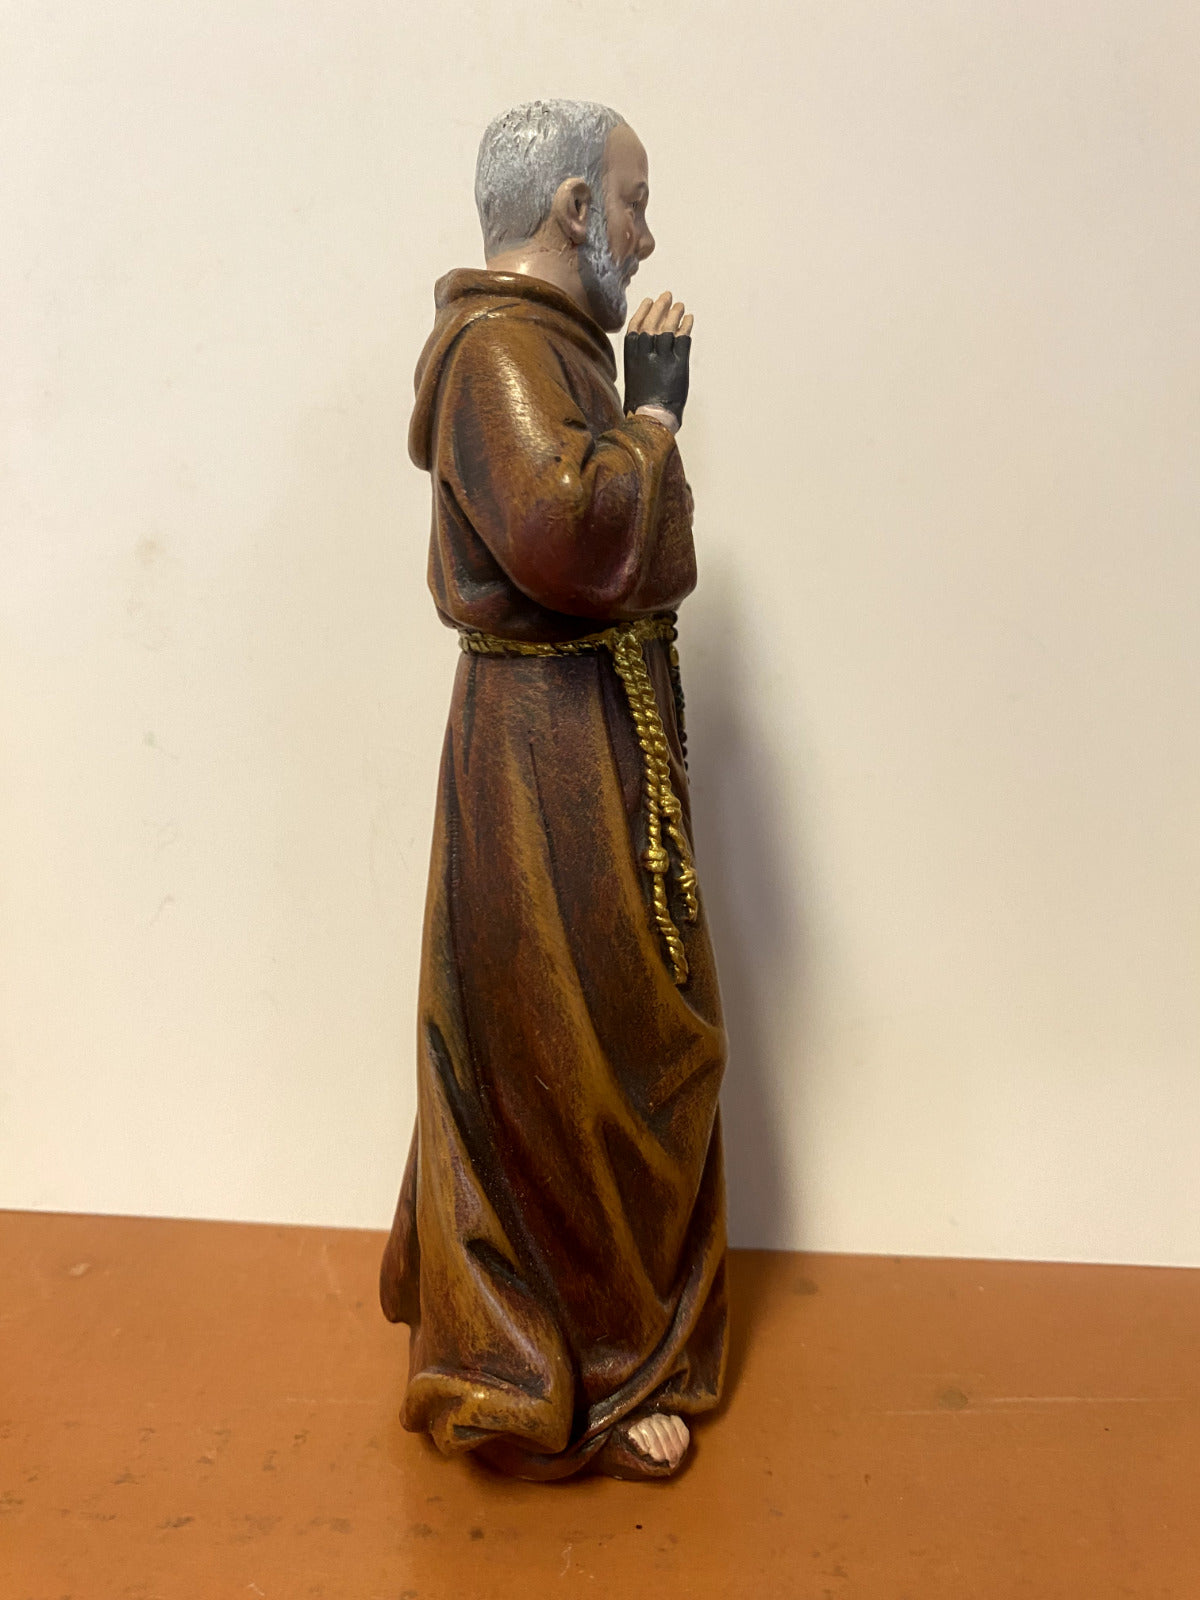 Padre Pio  6" Statue, New - Bob and Penny Lord